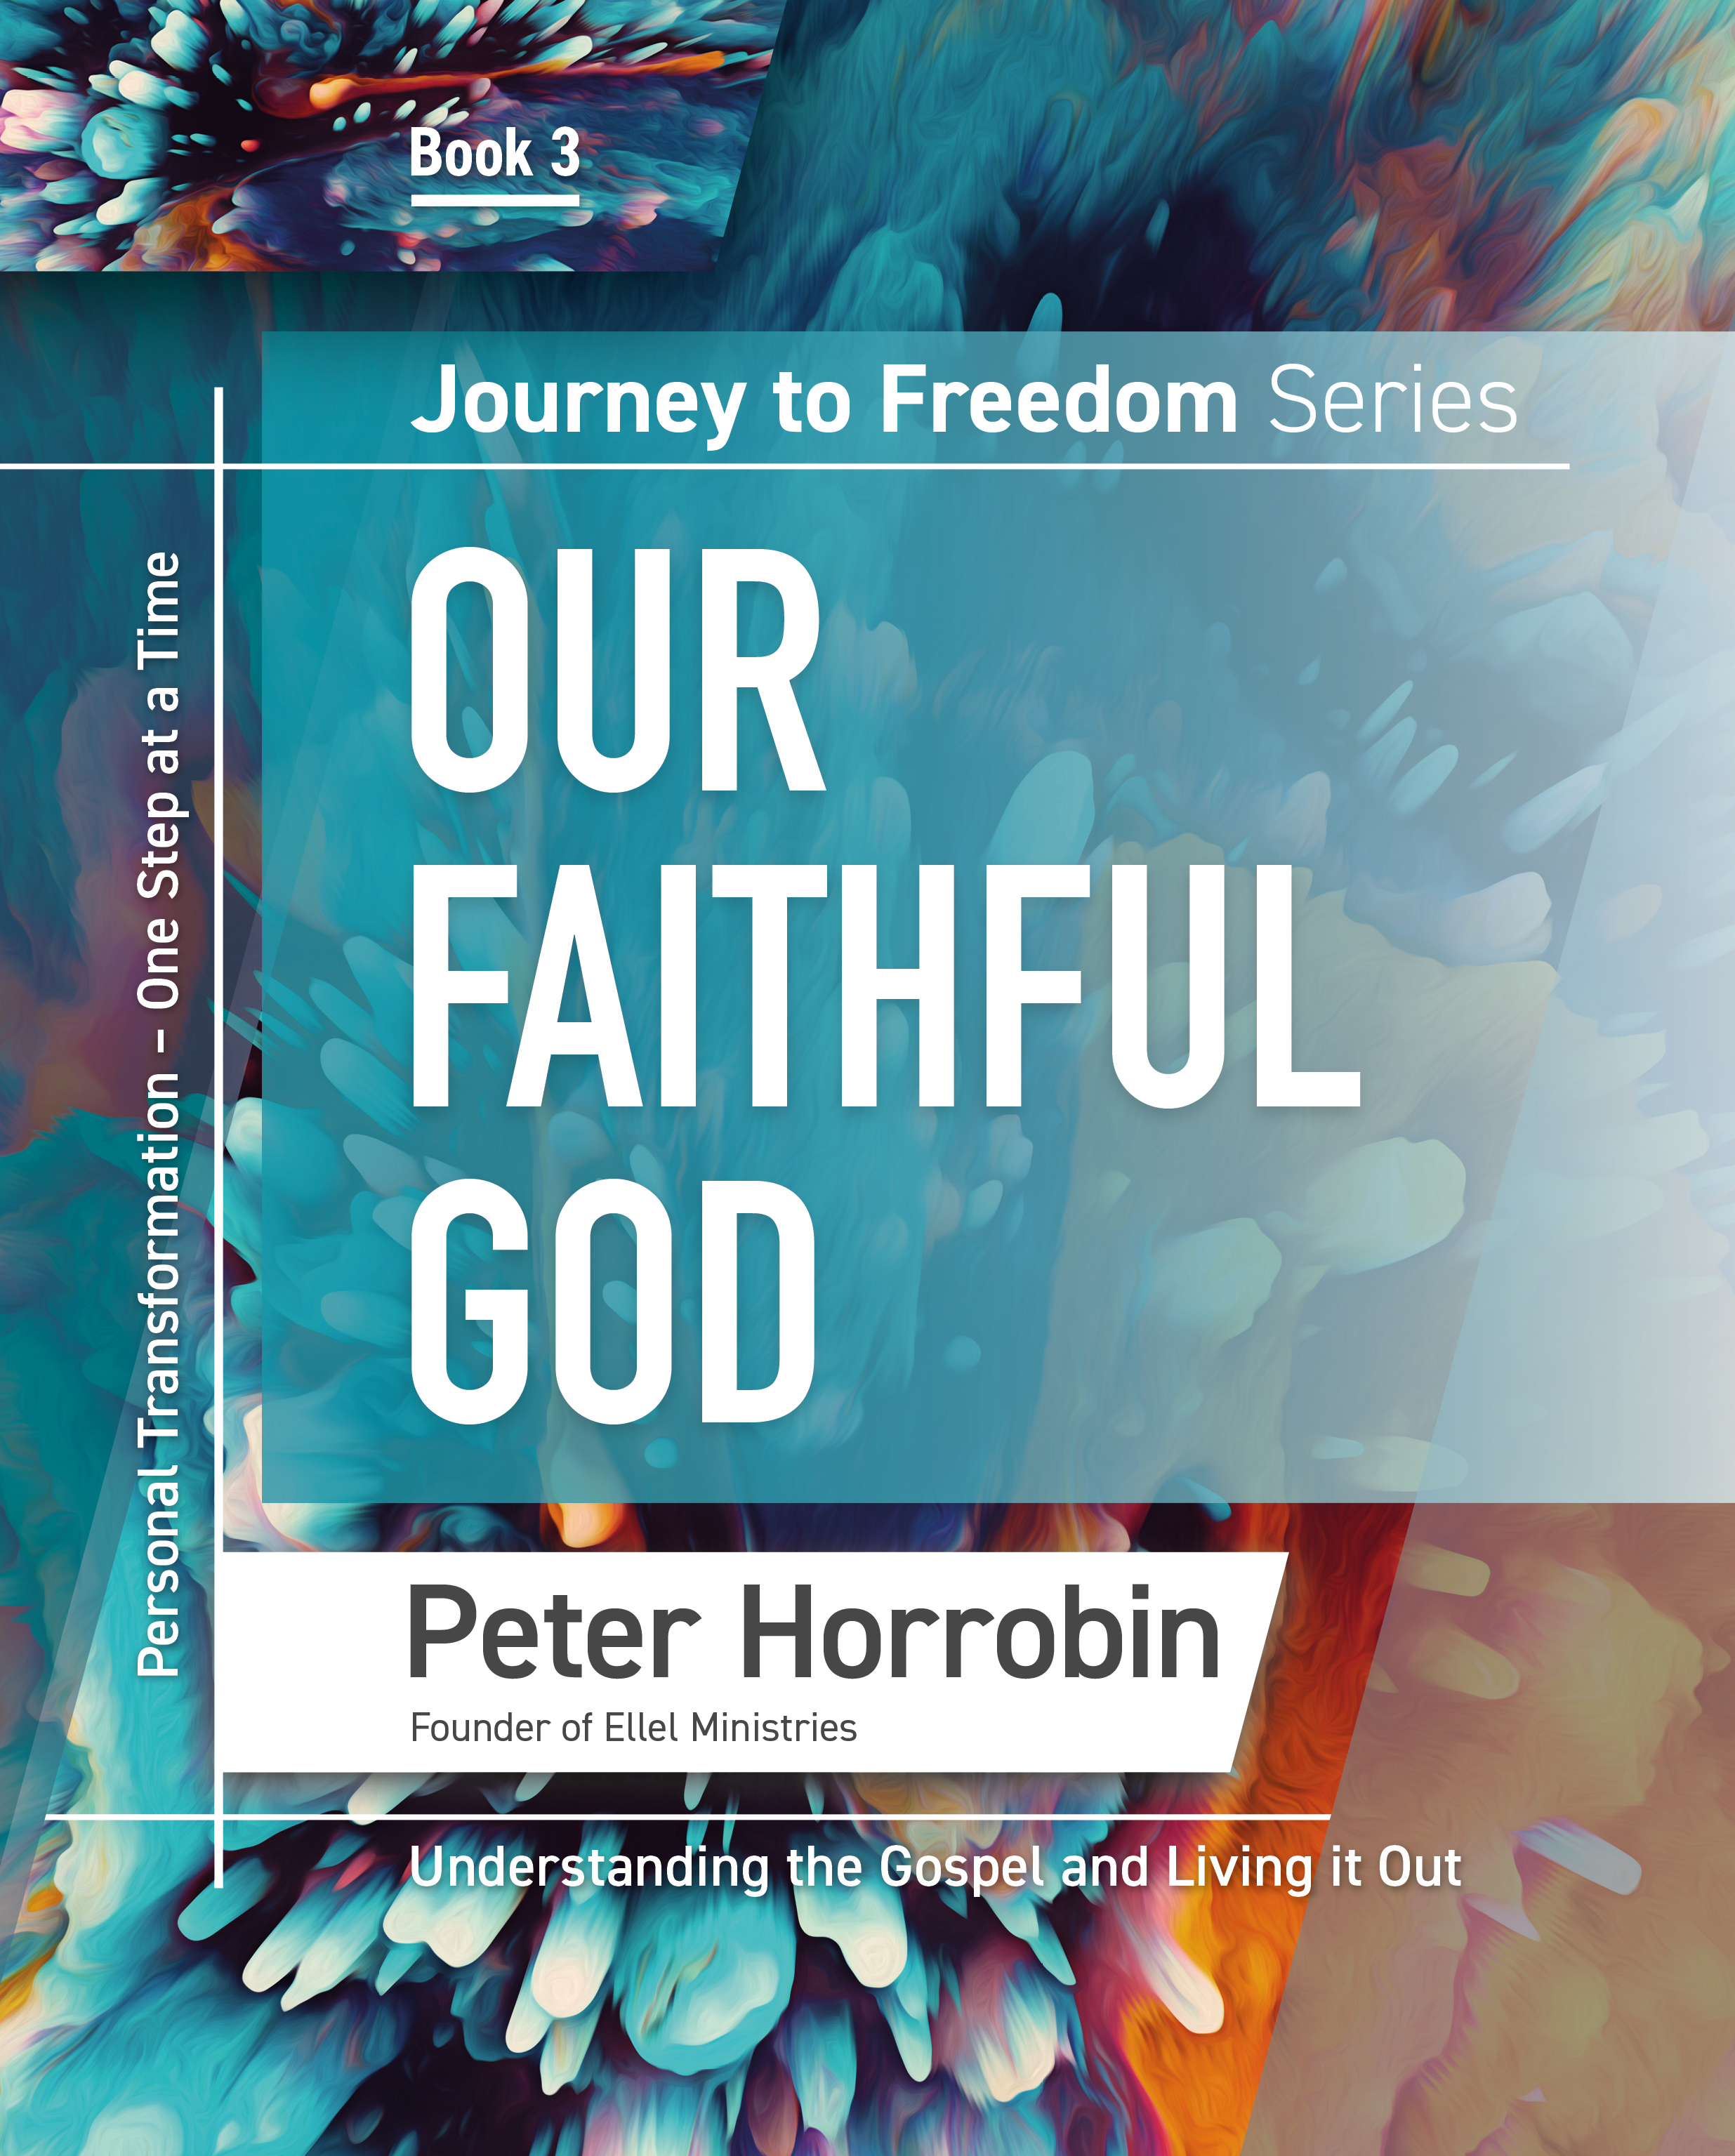 Journey to Freedom Book 3 - Our Faithful God. Peter Horrobin